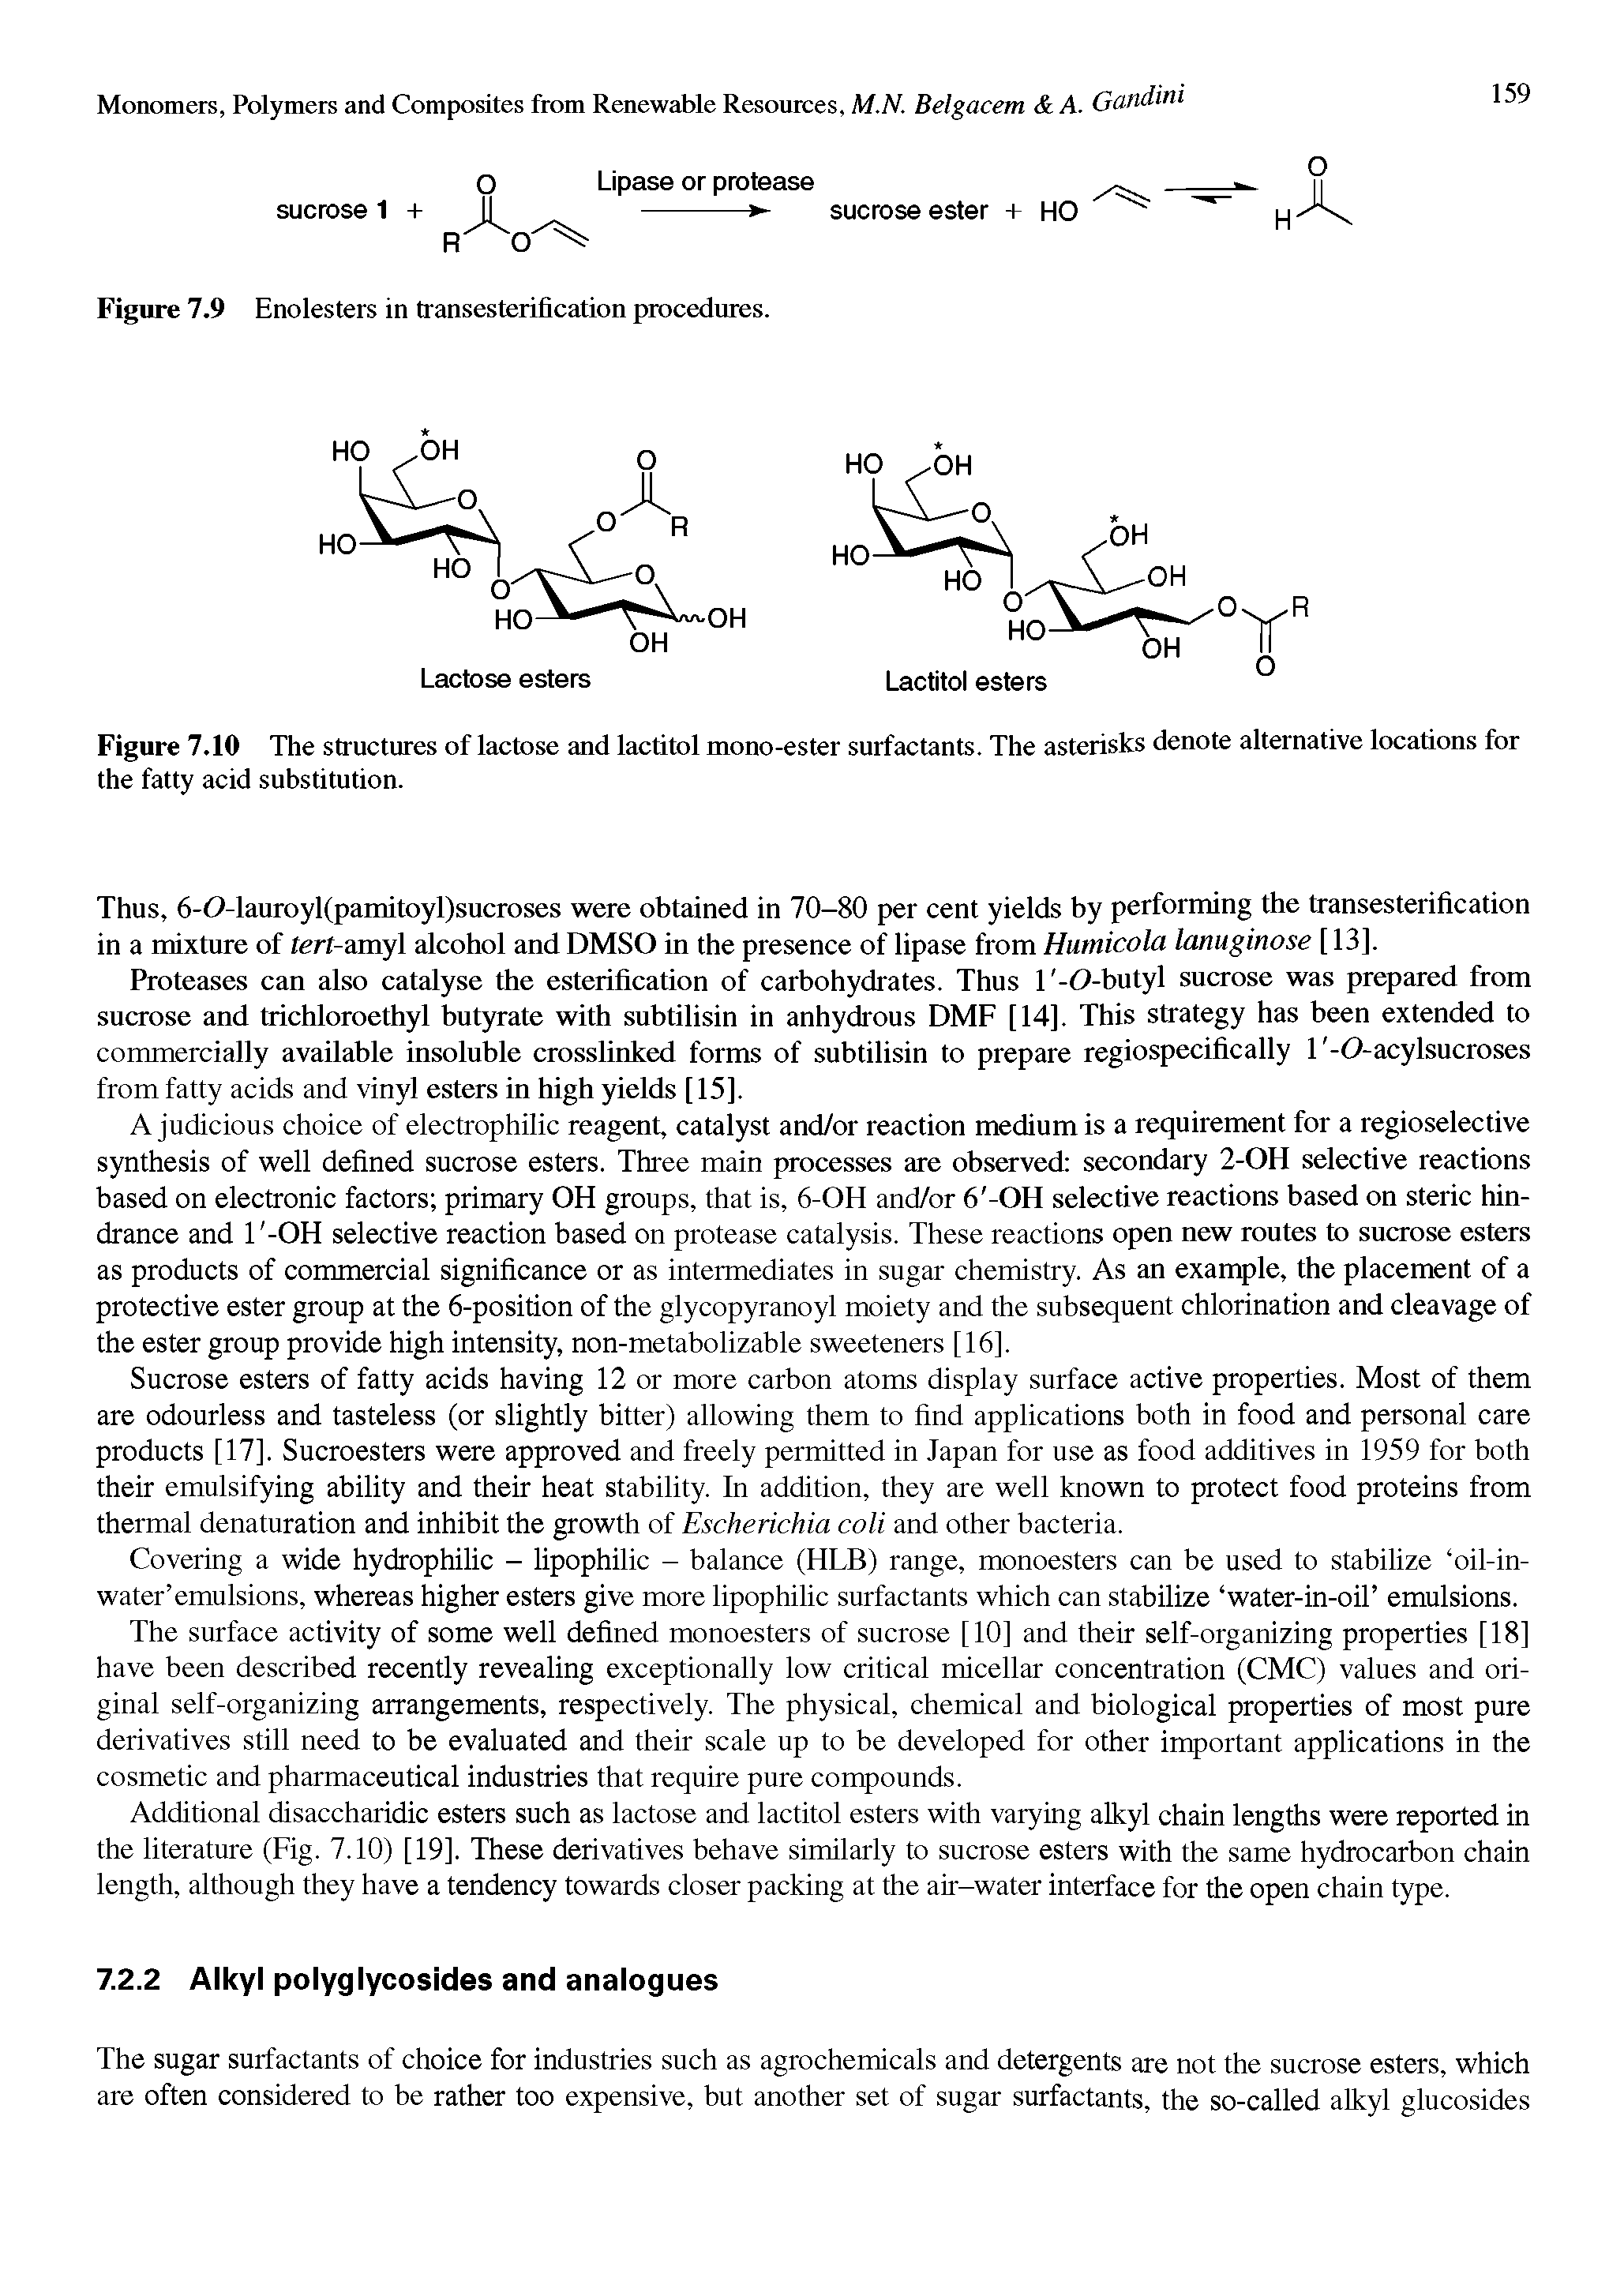 Figure 7.10 The structures of lactose and lactitol mono-ester surfactants. The asterisks denote alternative locations for the fatty acid substitution.